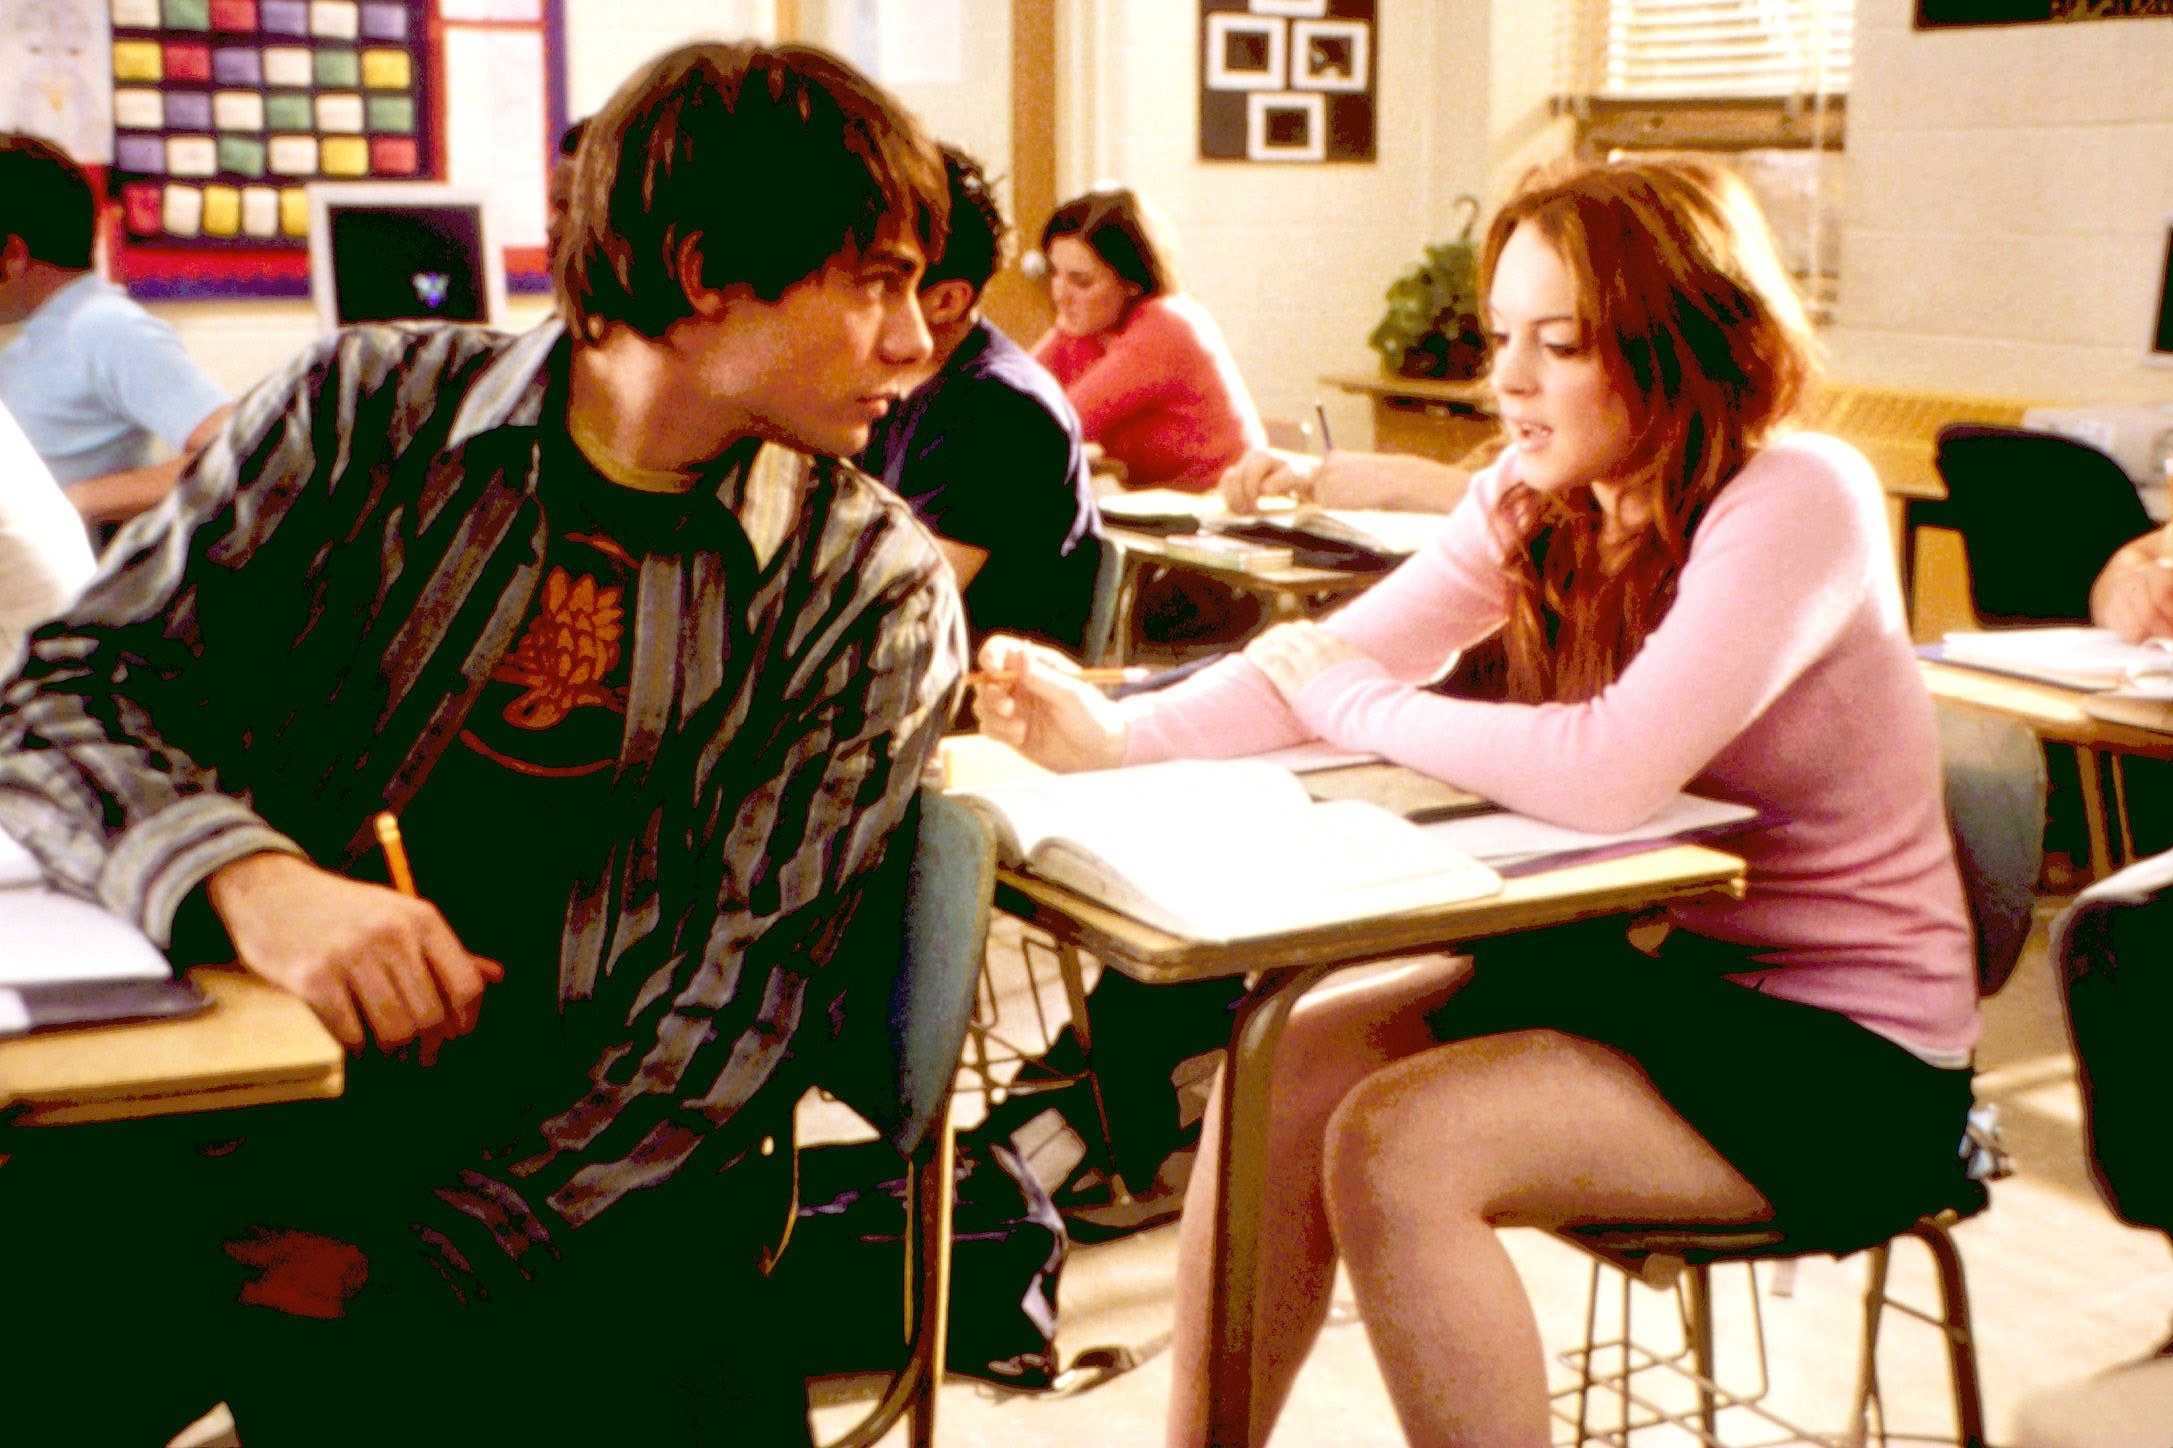 Jonathan looking back at Lindsay Lohan as they sit in a classroom in a scene from the film